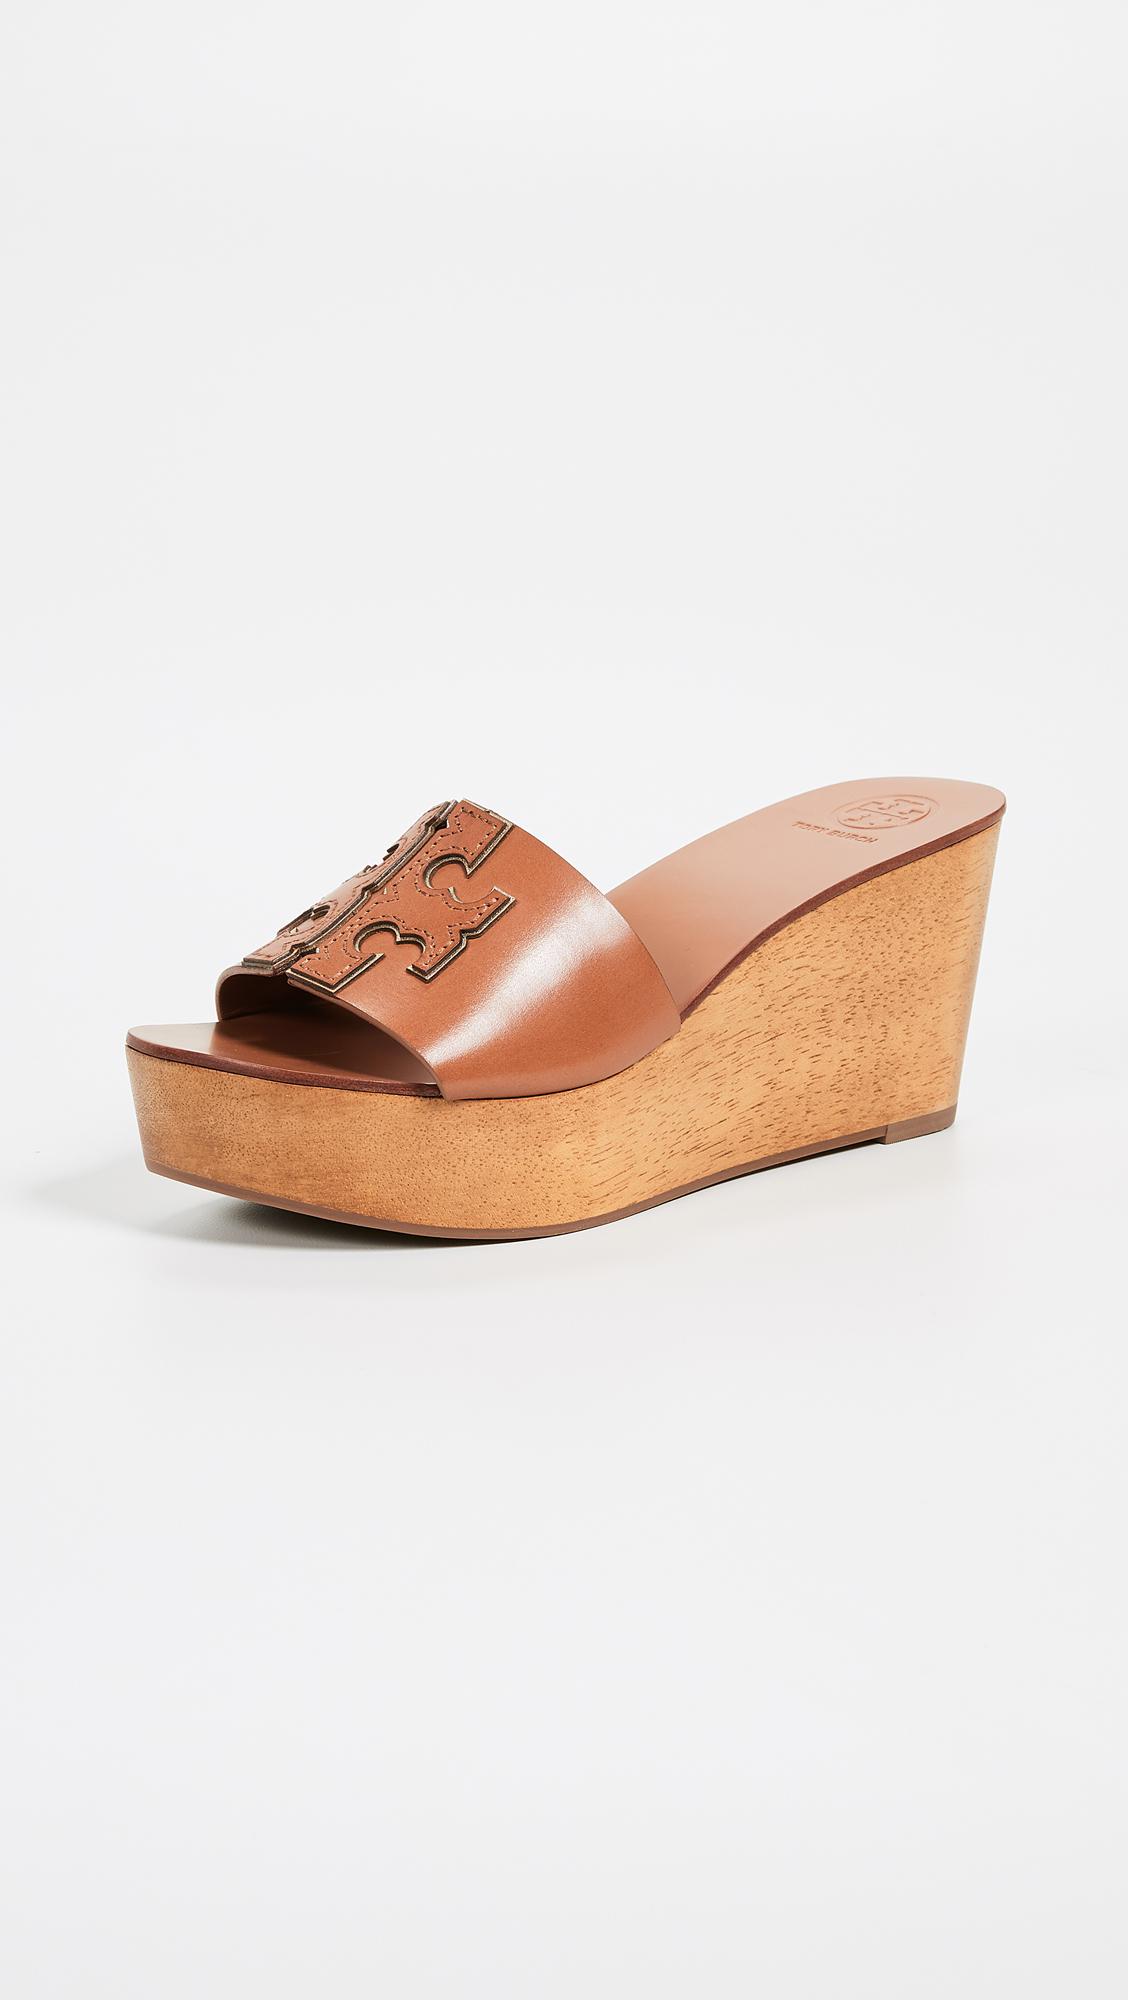 Tory Burch Leather Ines 80mm Wedge Slides in Brown - Lyst